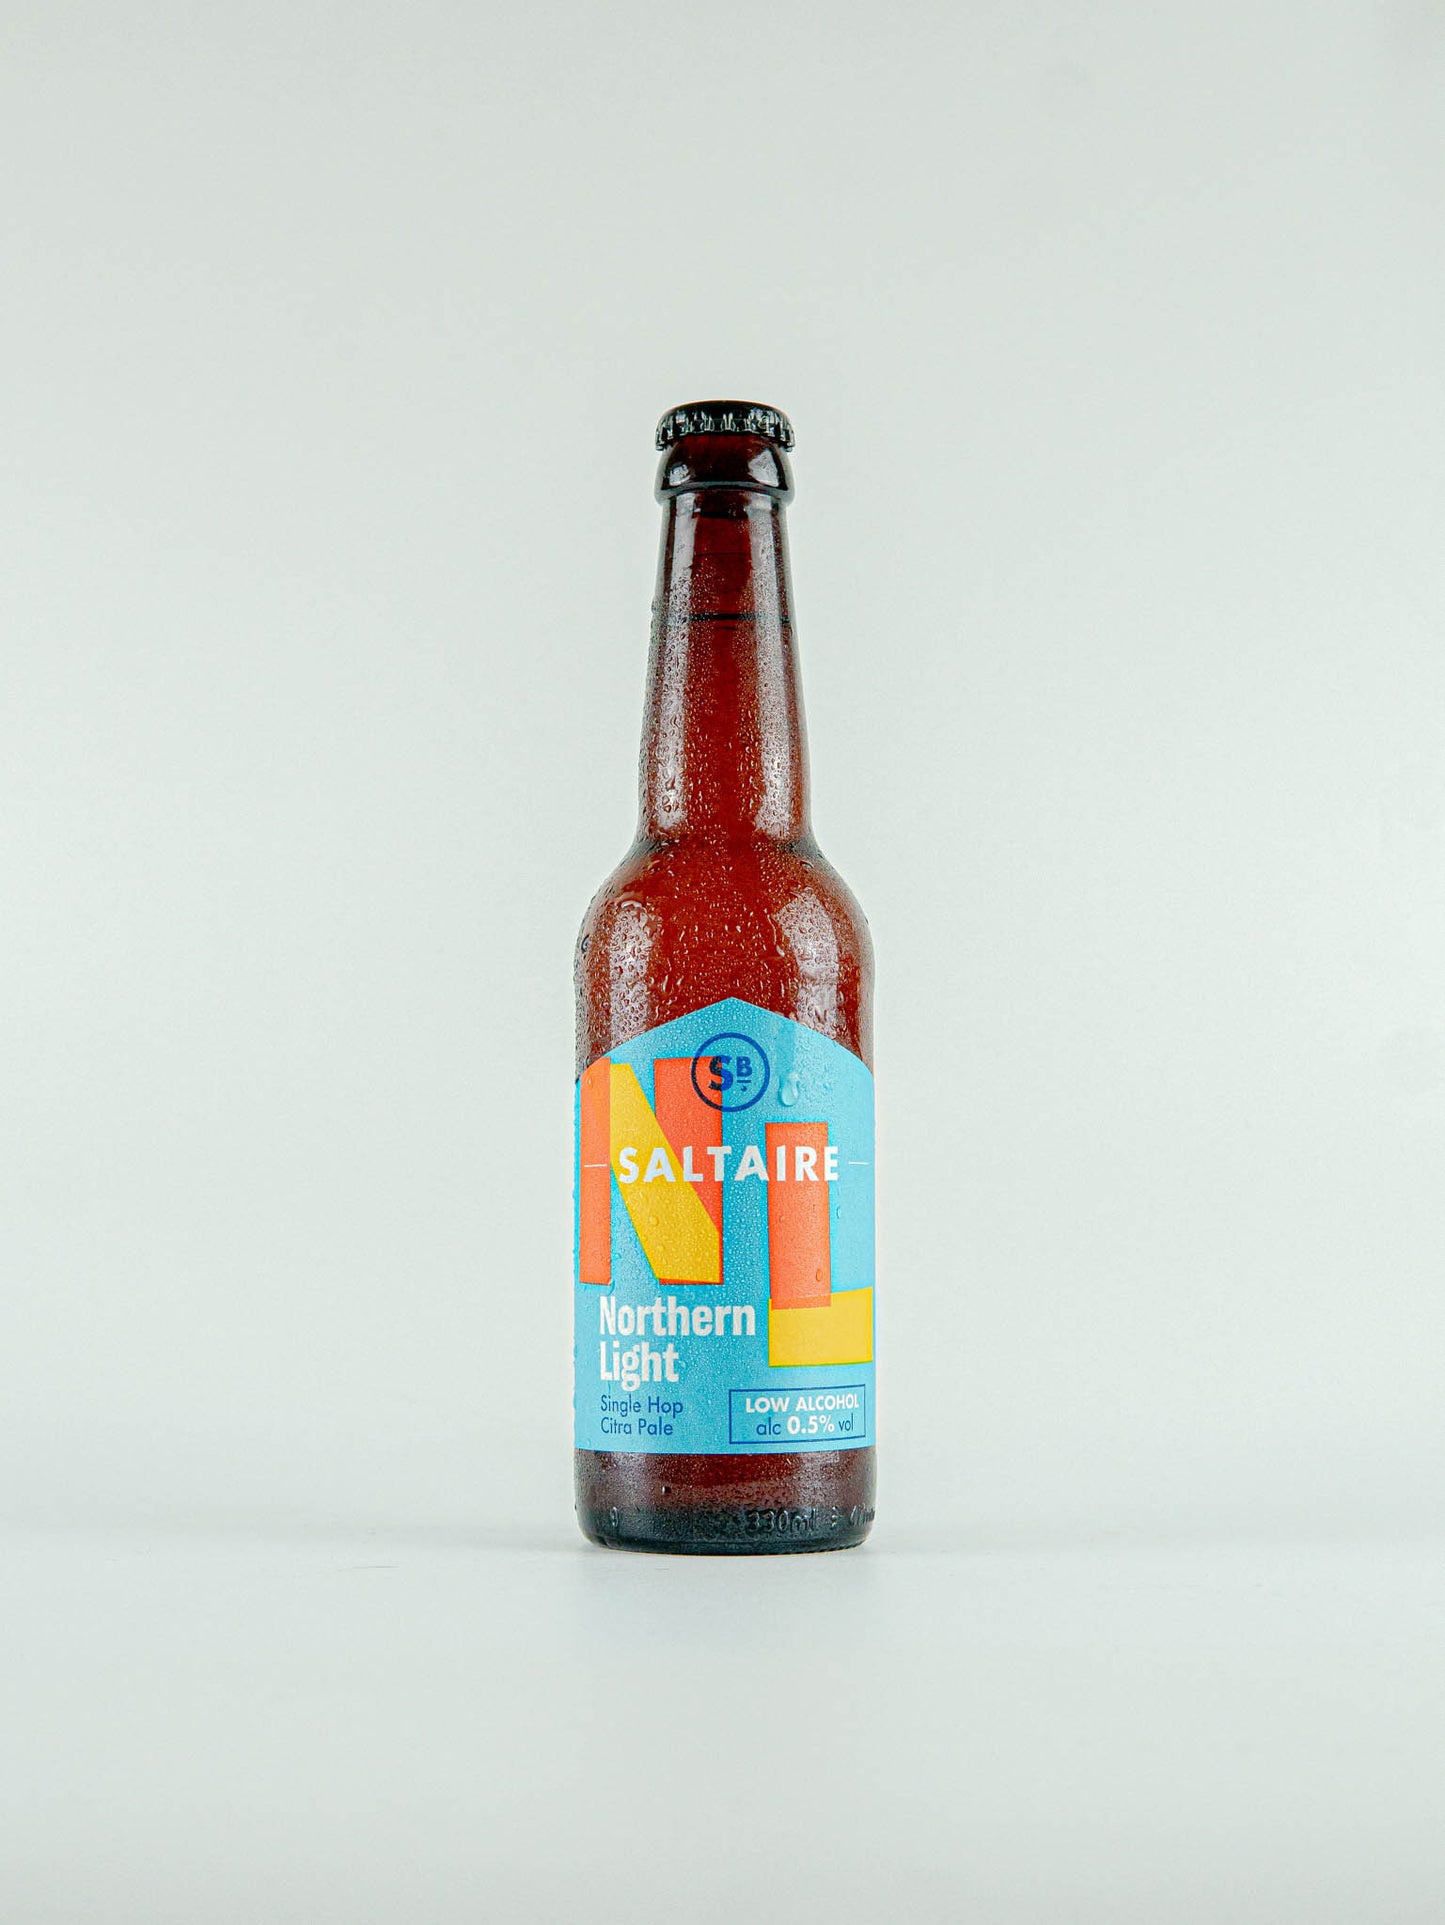 Saltaire Brewery Northern Light Single Hop Citra Pale 0.5% - 330ml